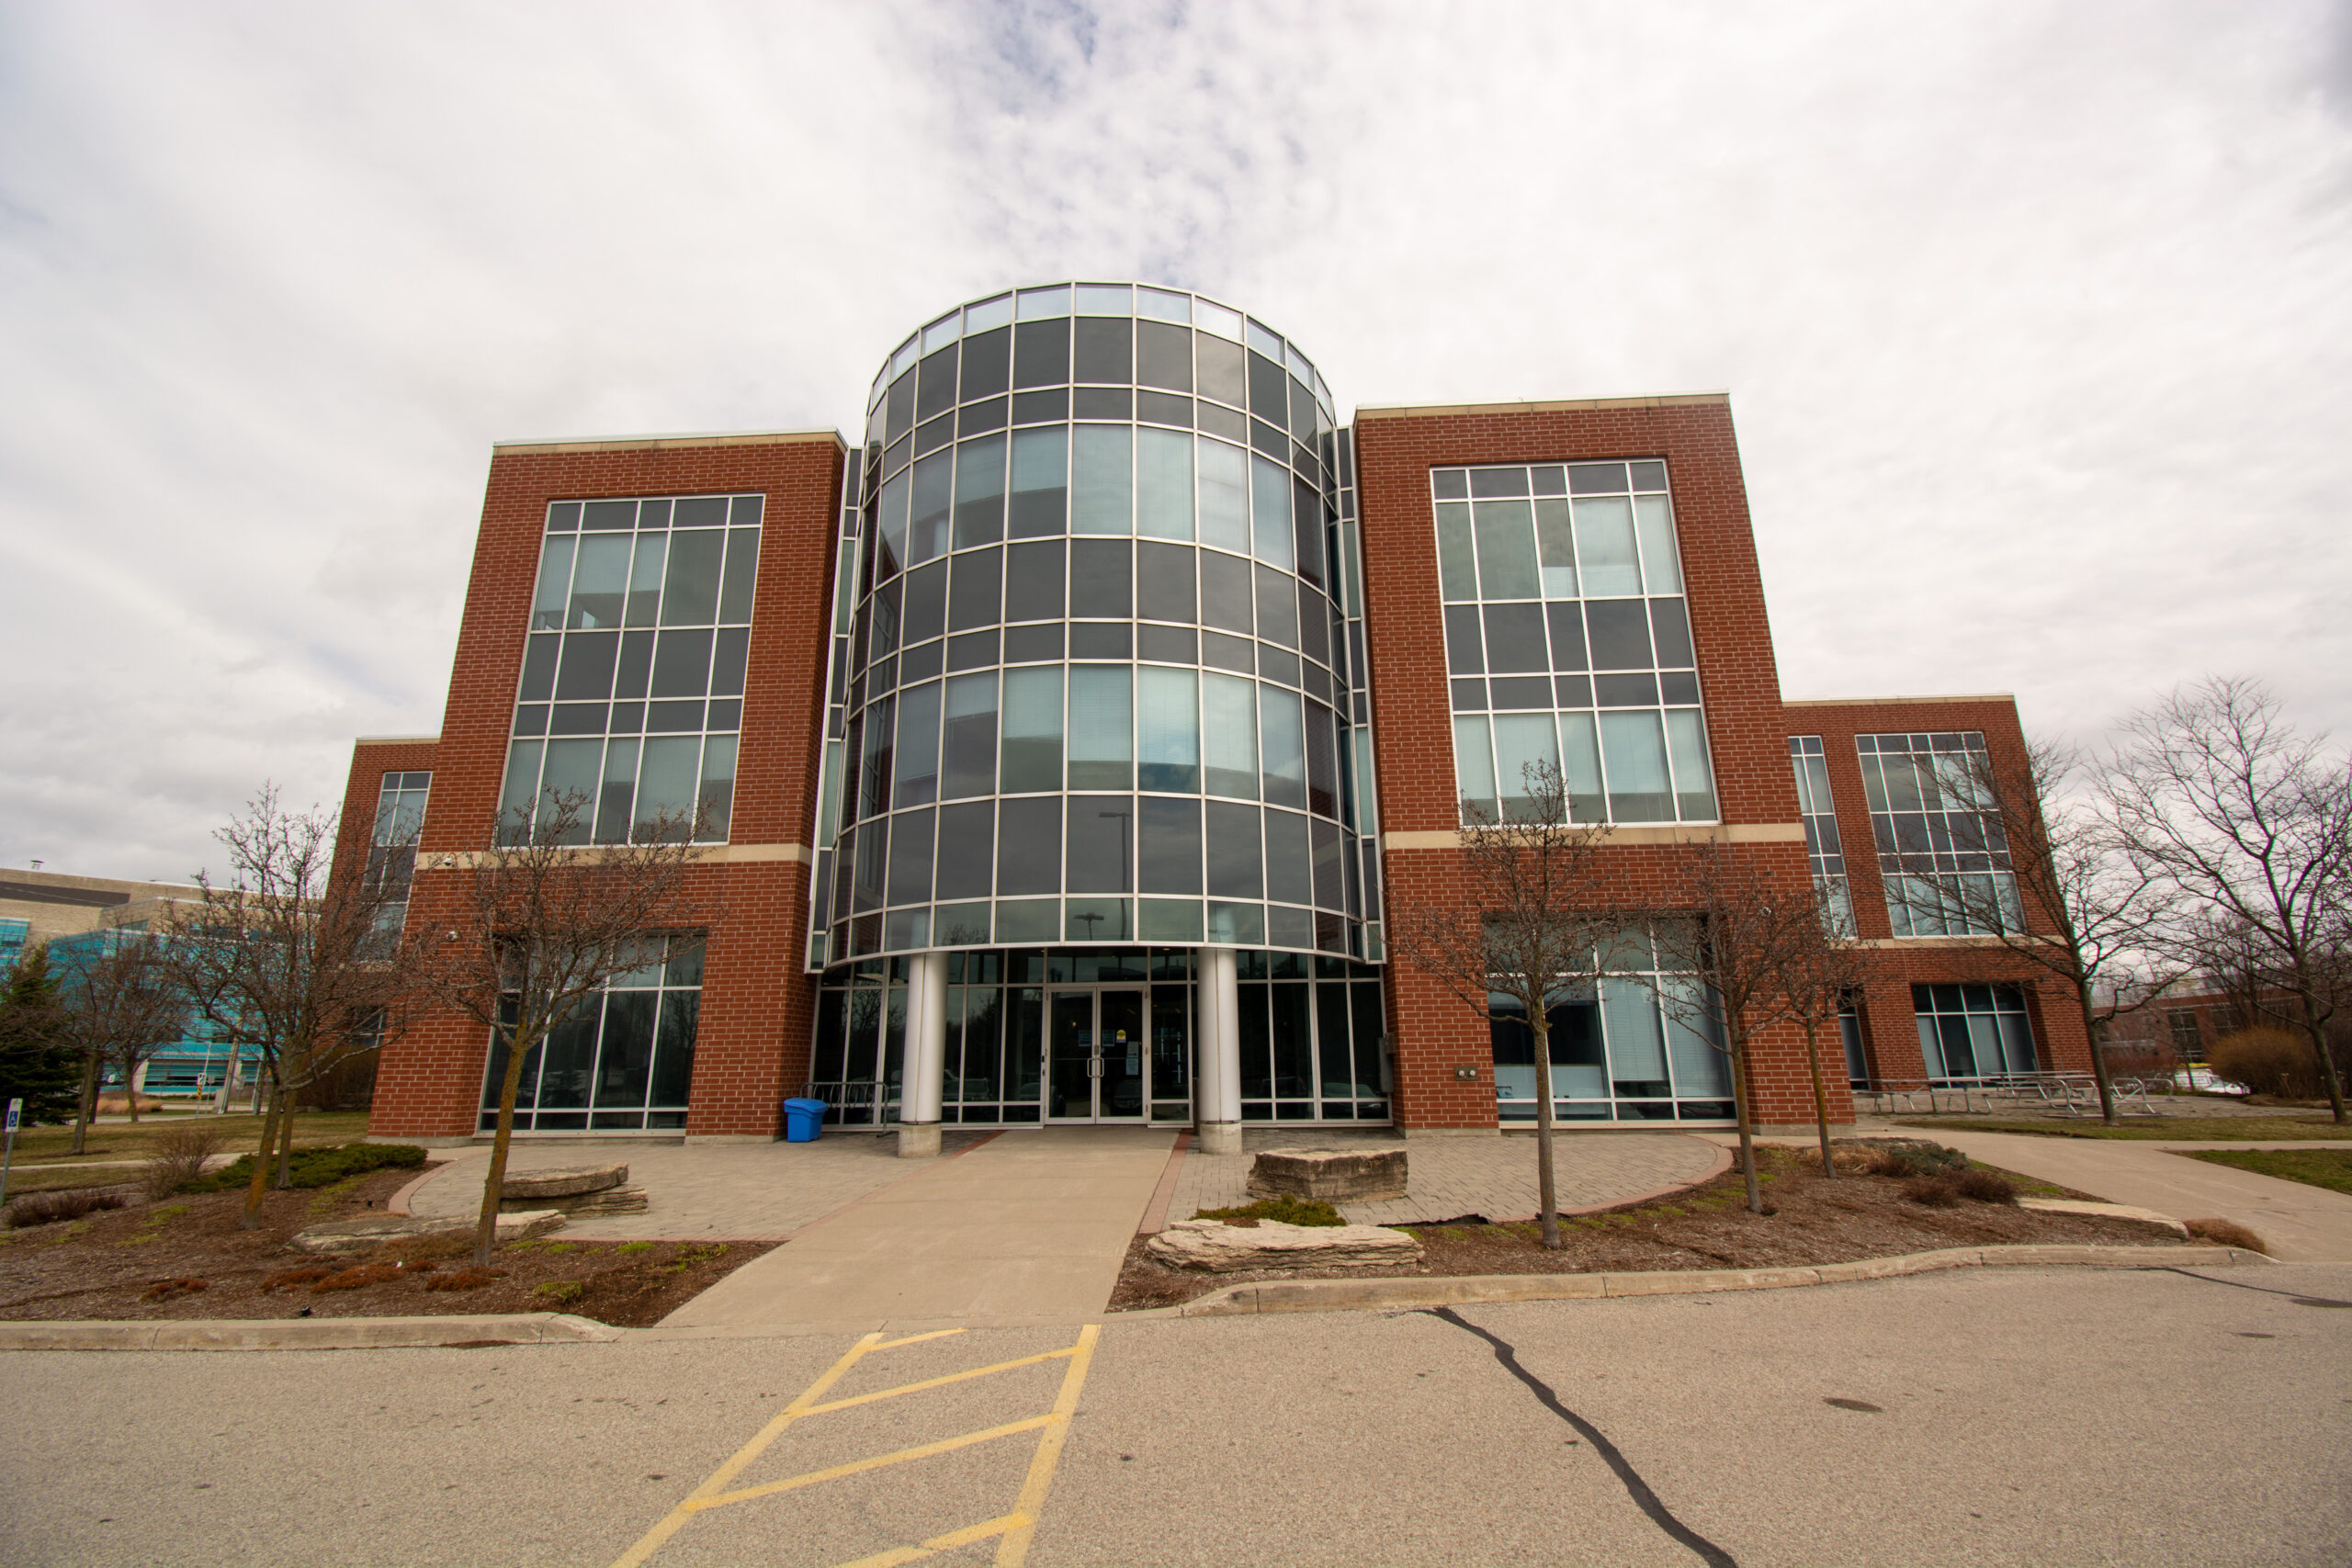 100 Stone Road W, Guelph | Multiple Office Spaces for Lease